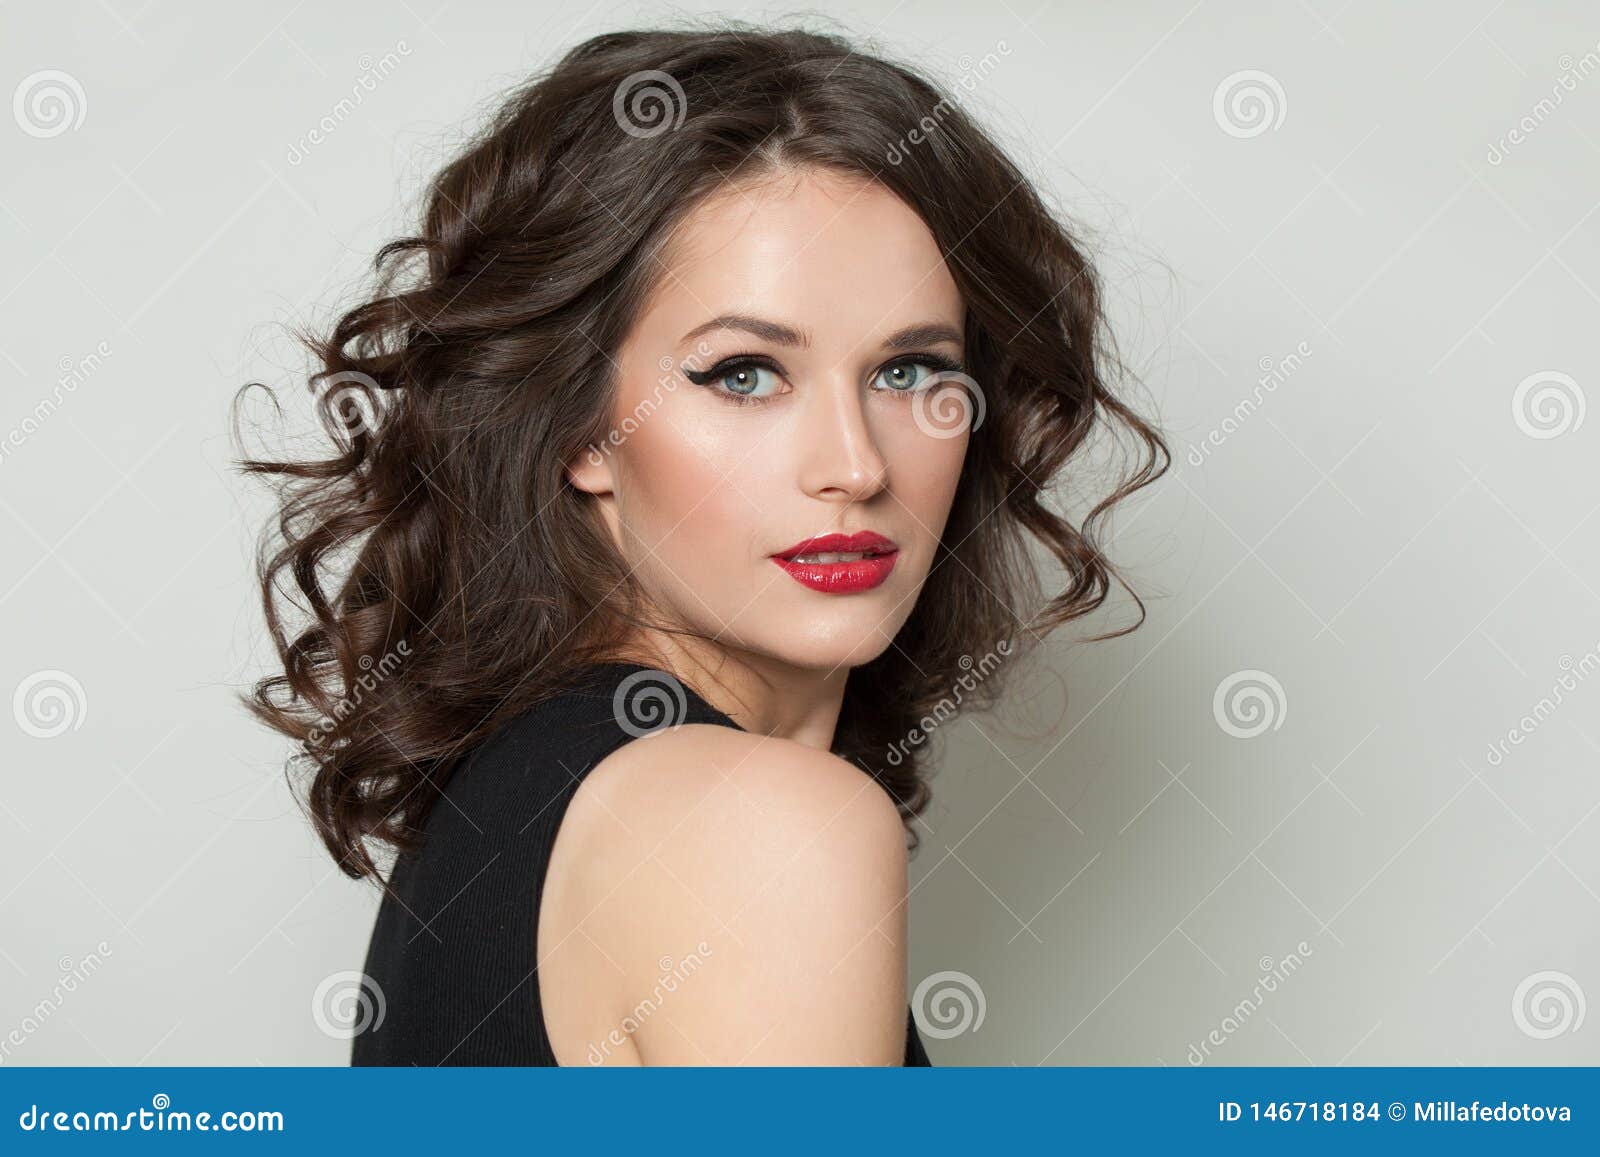 beautiful sexy woman looking at camera. pretty model with makeup and brown curly hair portrait